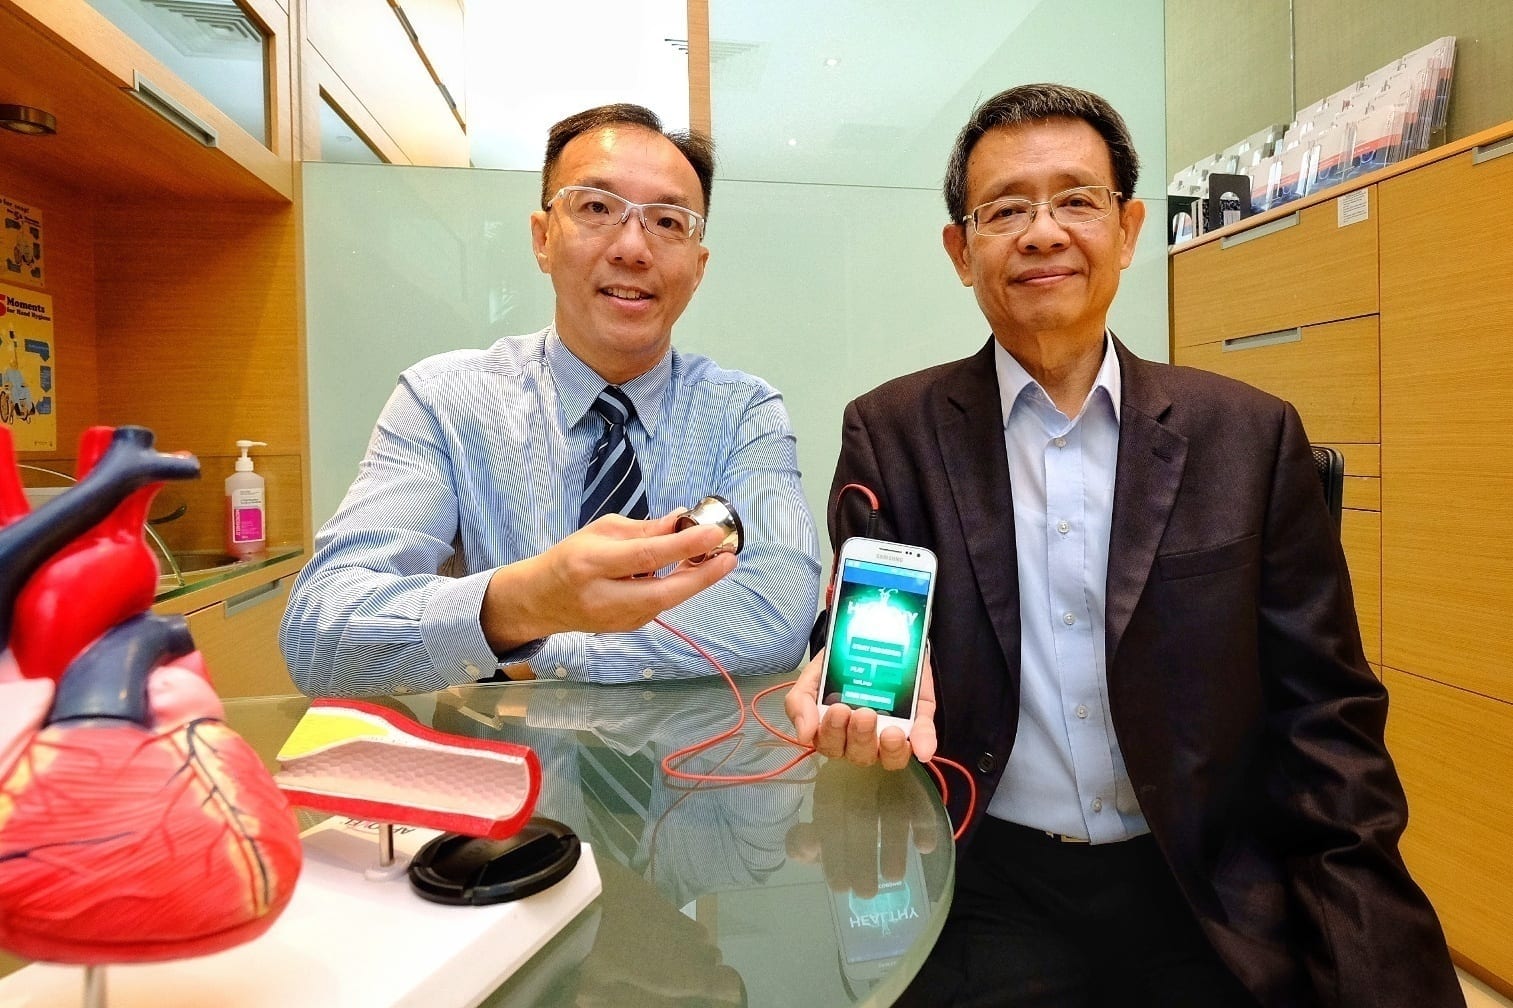 Inexpensive biosensor provides instant and accurate diagnosis of bacterial infections